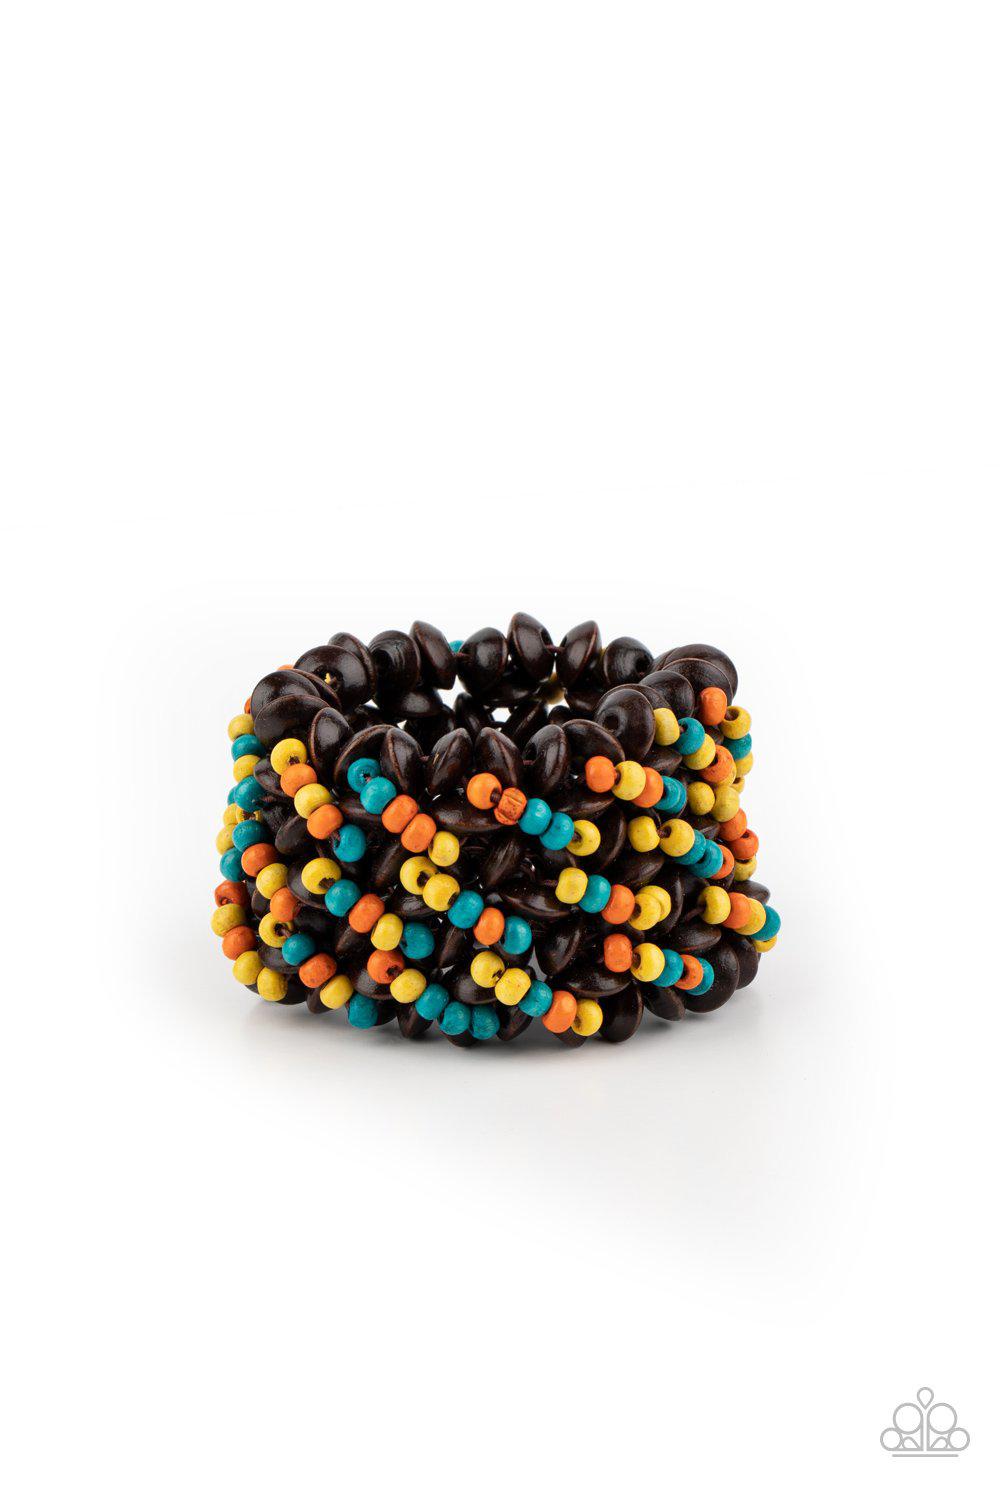 Cozy in Cozumel Multi and Brown Wood Bracelet - Paparazzi Accessories- lightbox - CarasShop.com - $5 Jewelry by Cara Jewels